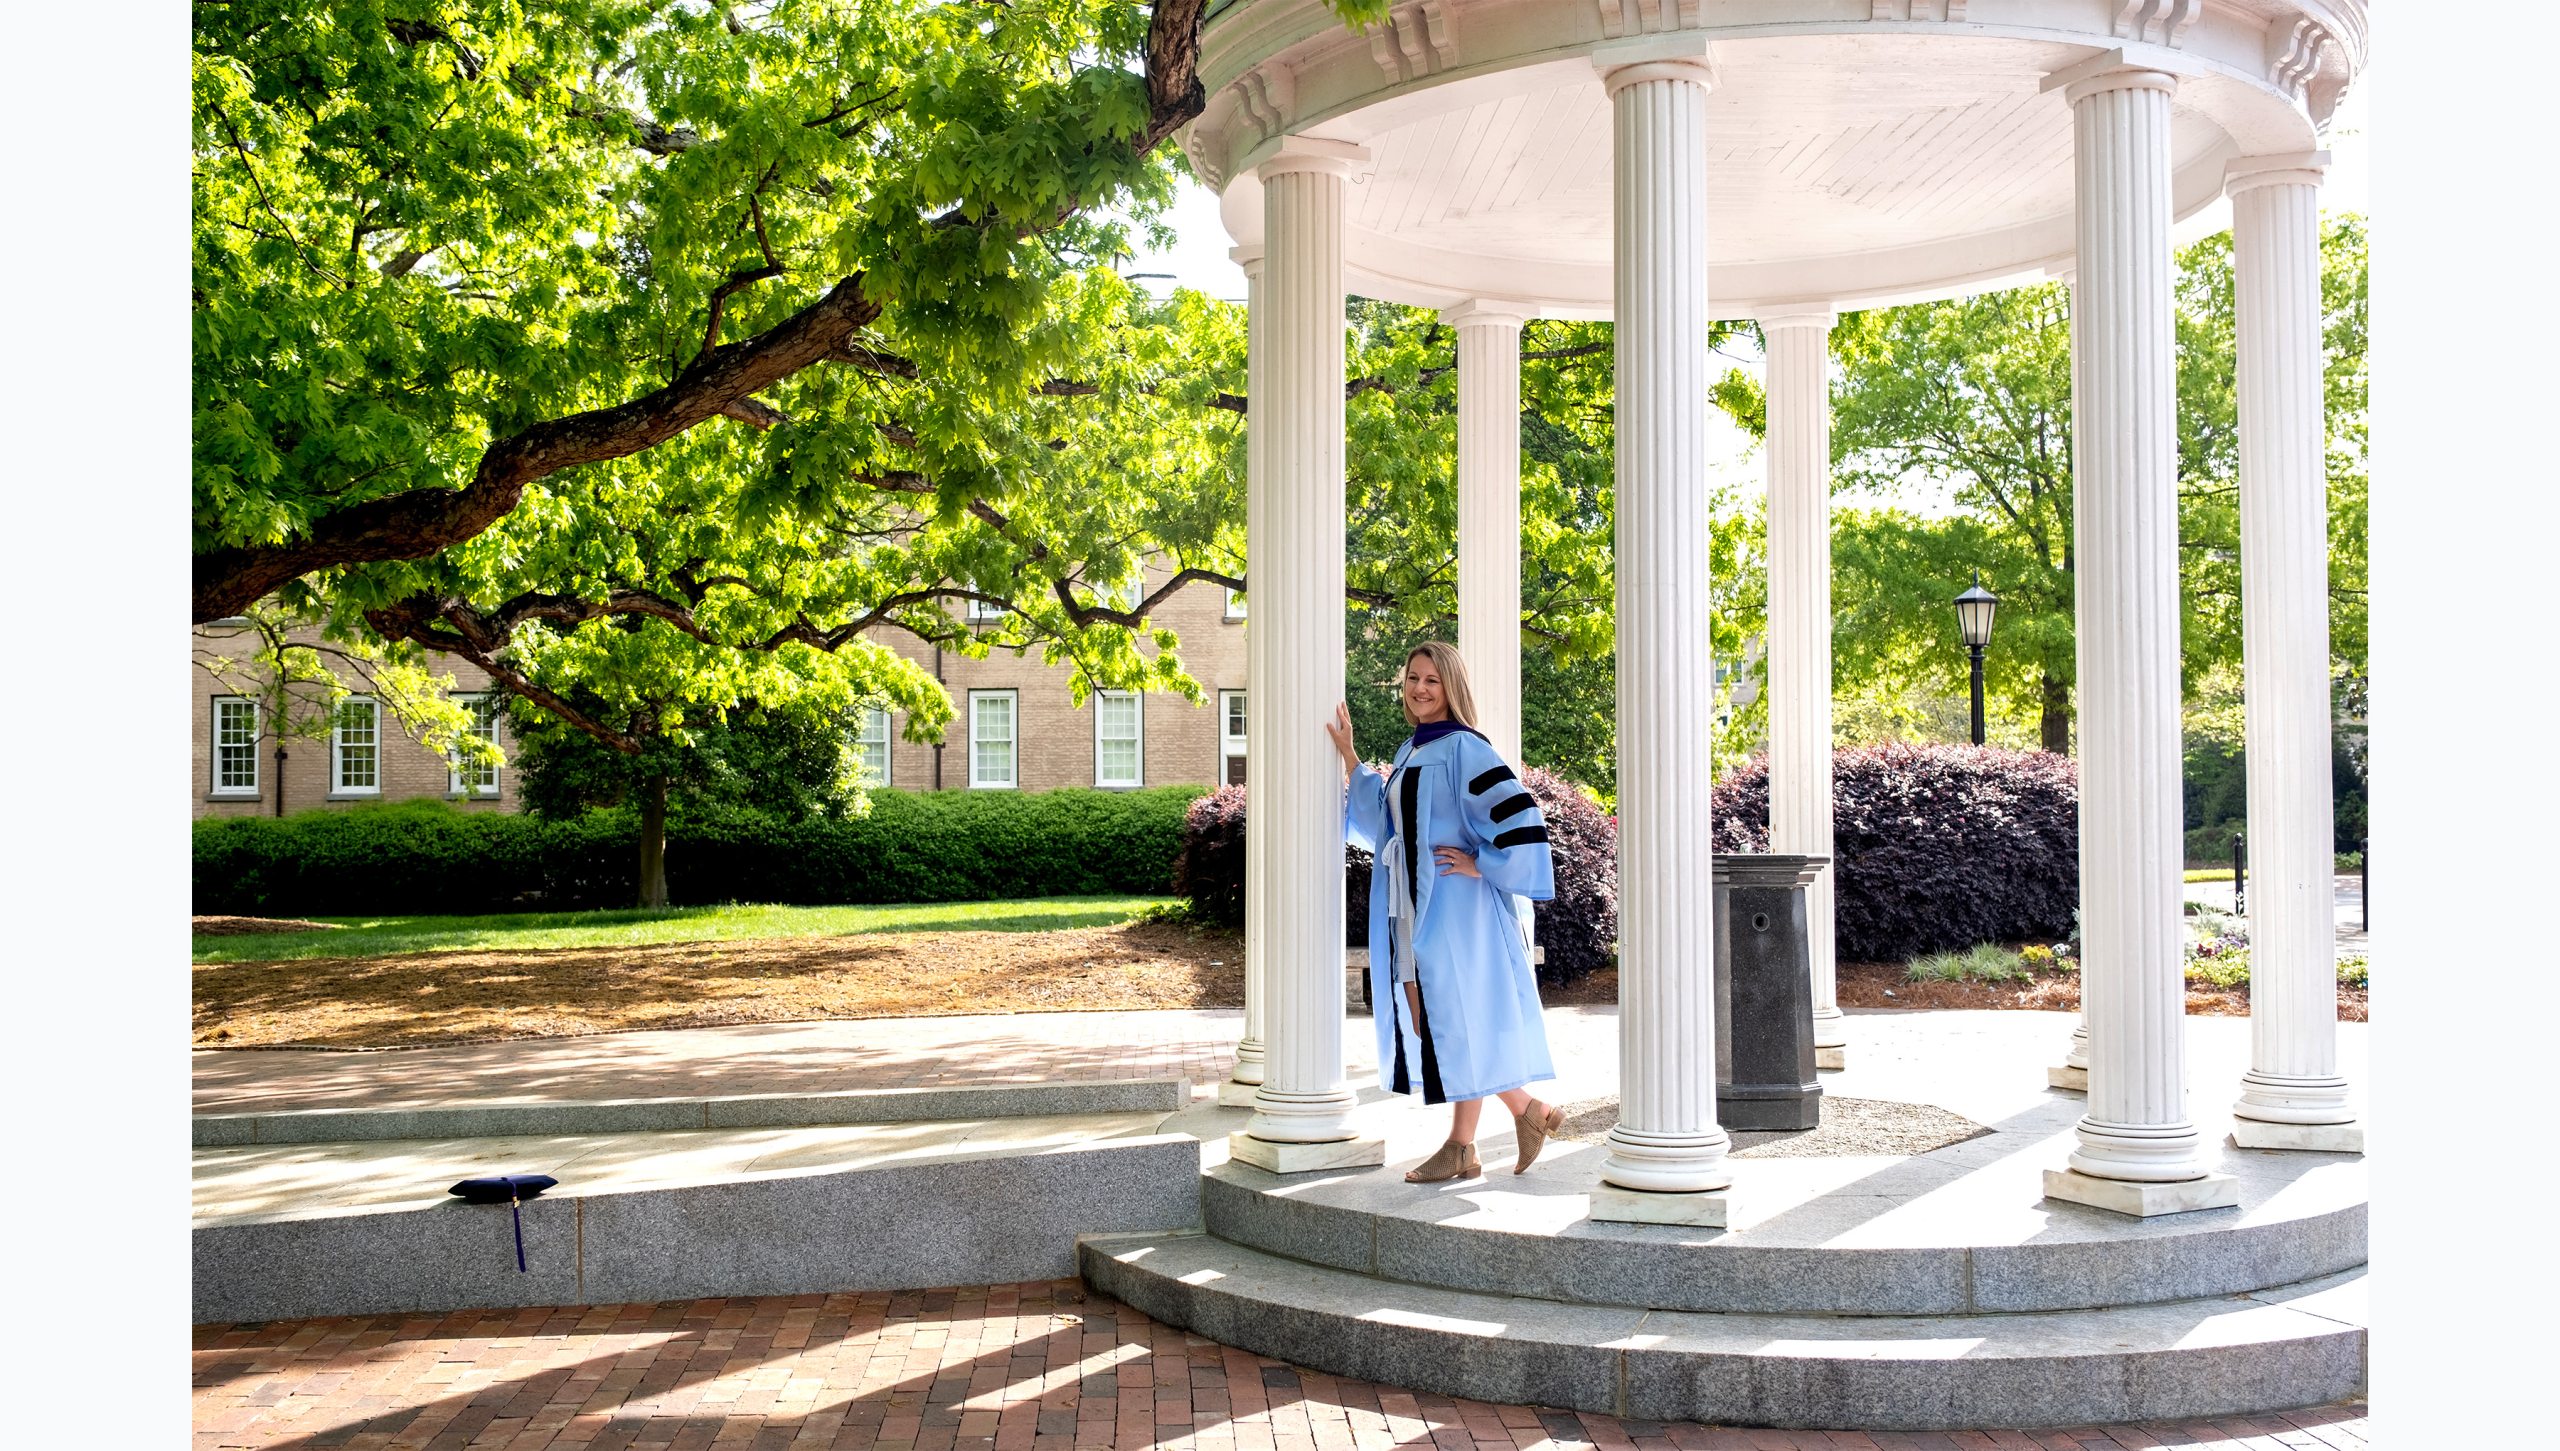 A student posing for a graduation photo at the Old Well.